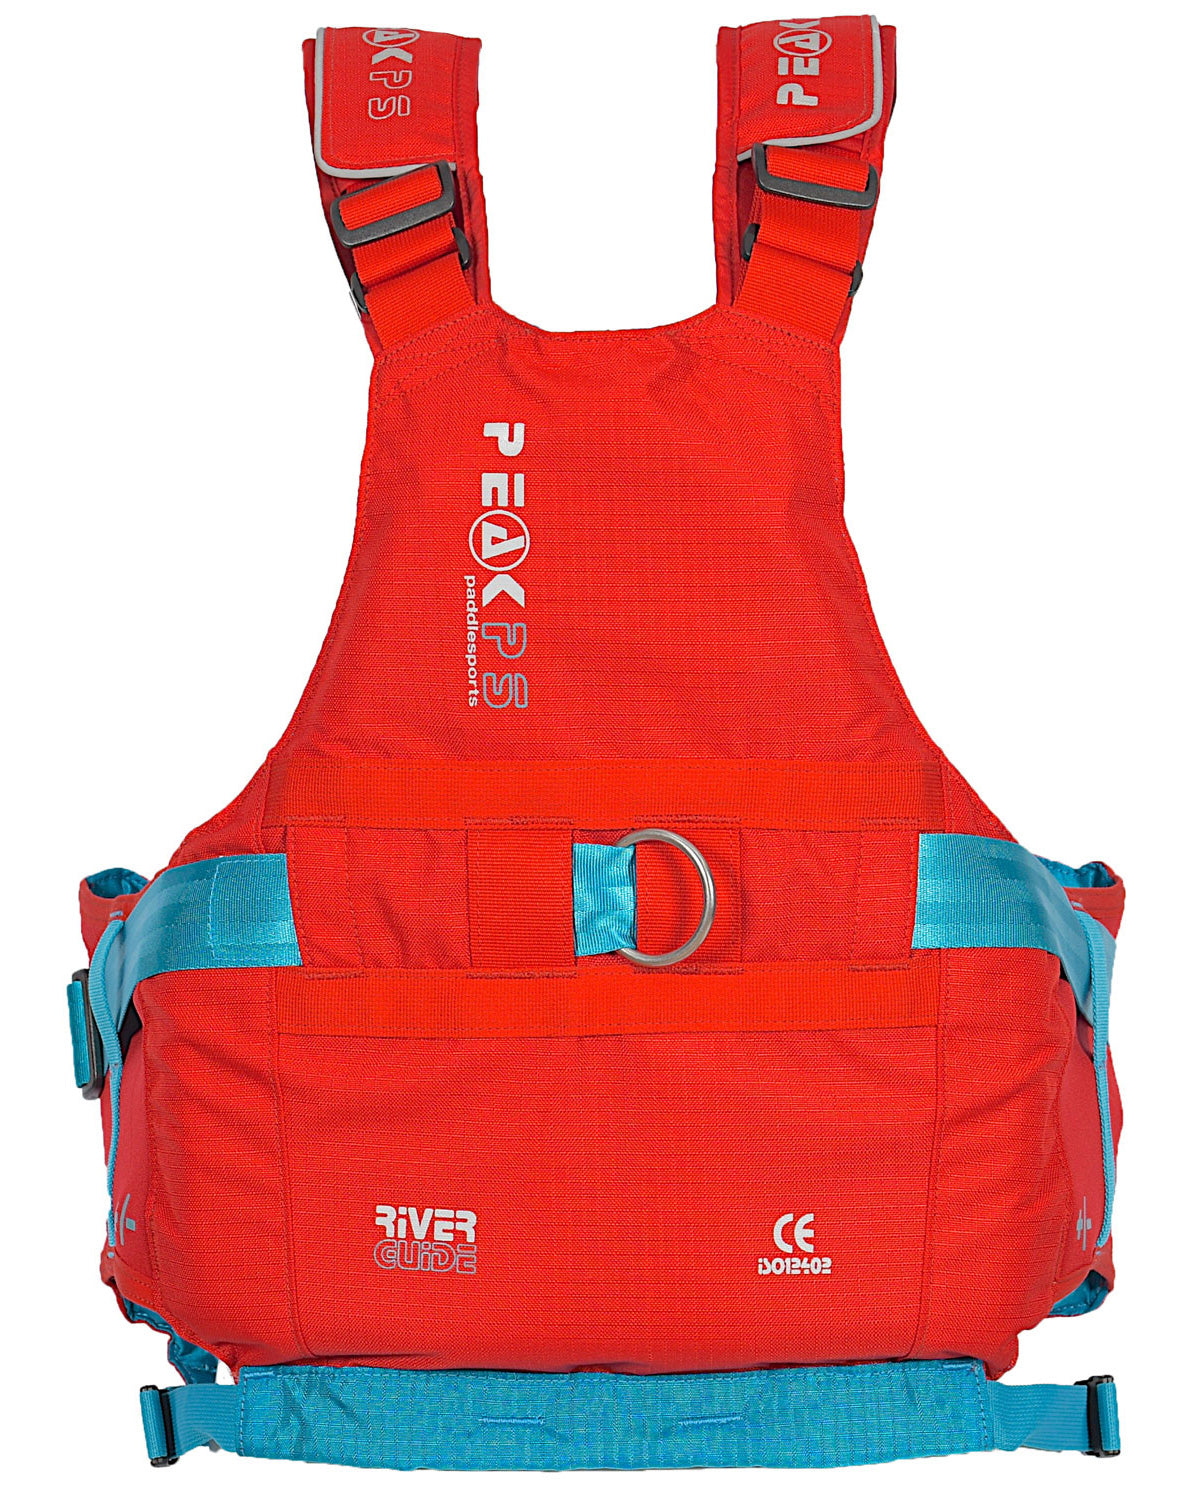 Red Peak Paddlesports' River guide vest from the rear